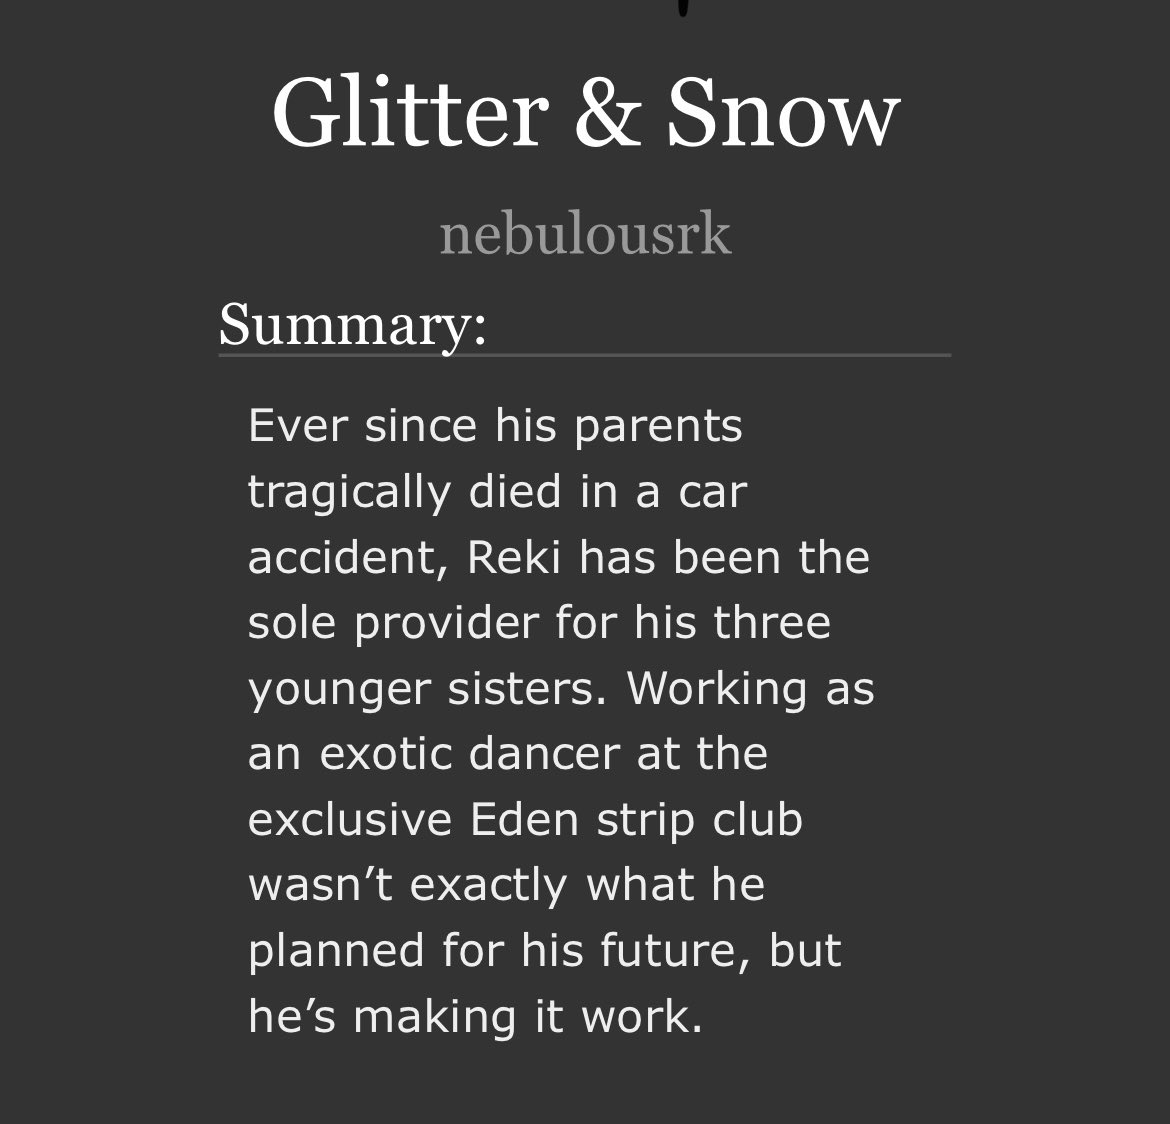 Glitter & Snow by nebulousrk - SK8 the Infinity (Anime) archiveofourown.org/works/40178808 via @ao3org did someone say stripper au? No that was just me? Oh. I know I have lots of work in progress, but stripper Reki was calling to me and I just couldn’t resist #sk8 #renga #SK8THEINFINITY